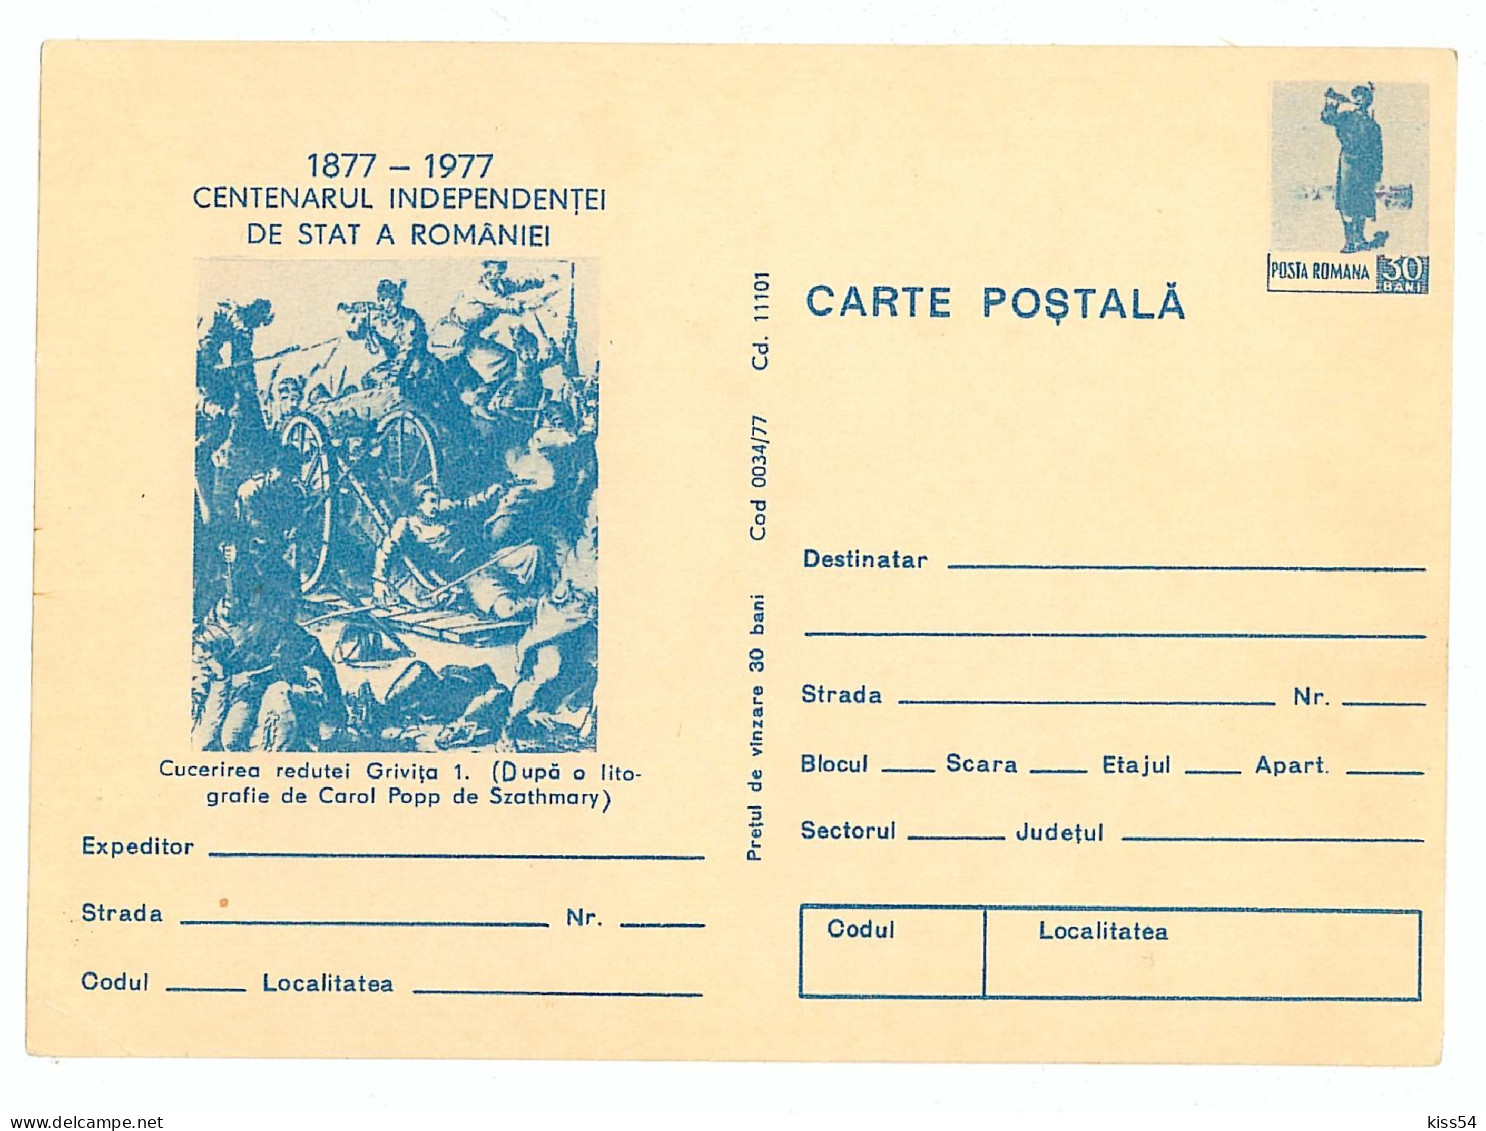 IP 77 A - 34 Centenary Independence Of Romania - Stationery - Unused - 1977 - Ganzsachen